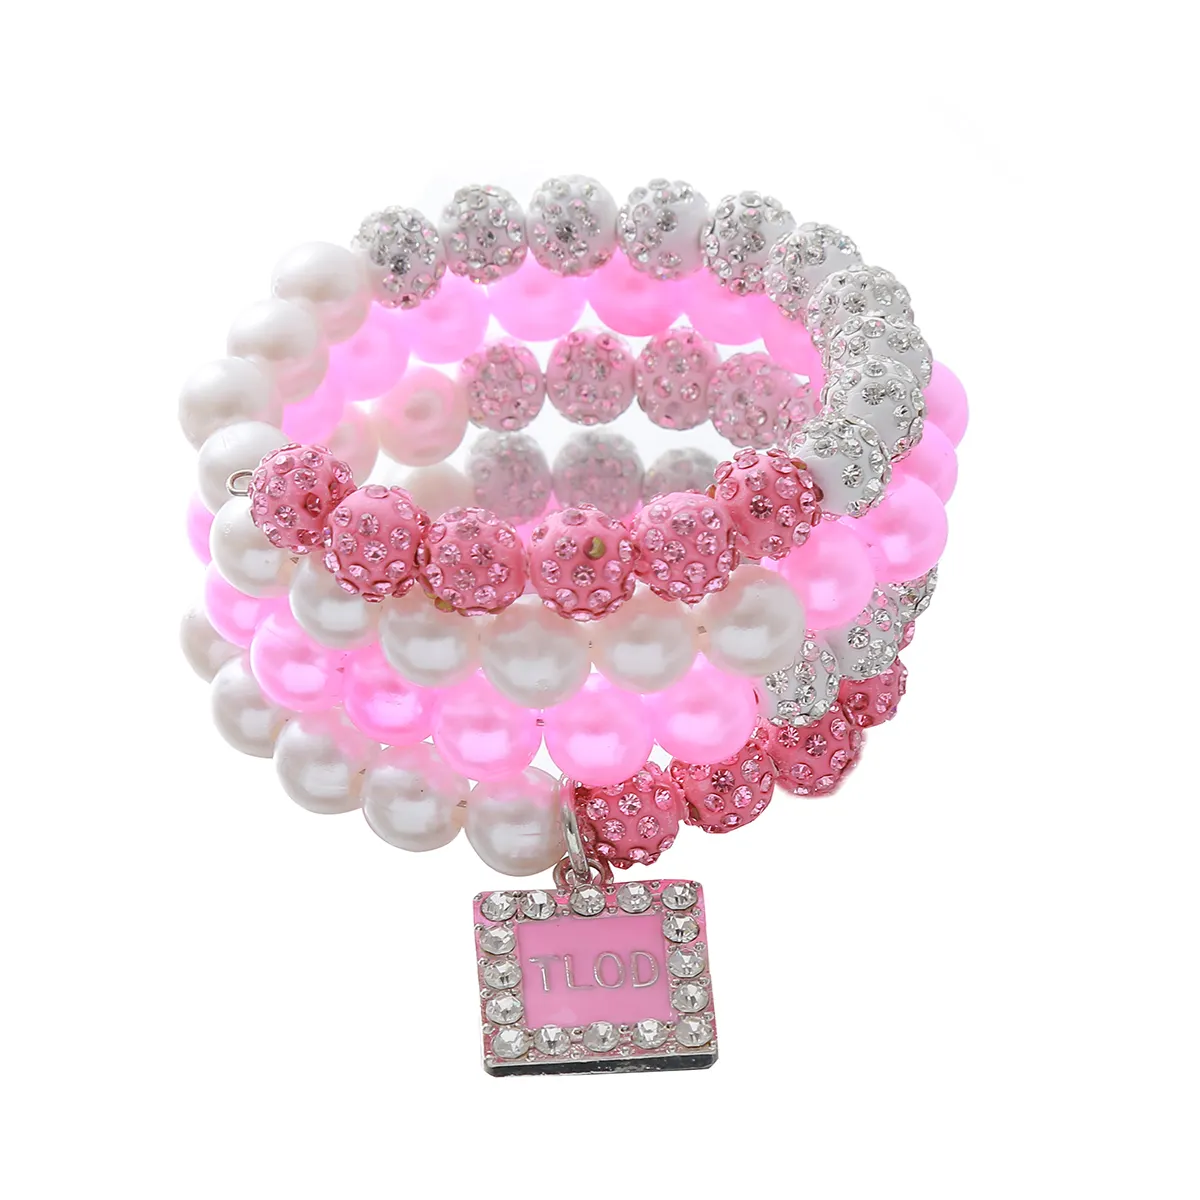 Top Ladies Of Distinction Inspired Statement Sorority Jewelry Pink And White Pearl Beaded TLOD Layered Stackable Bracelet